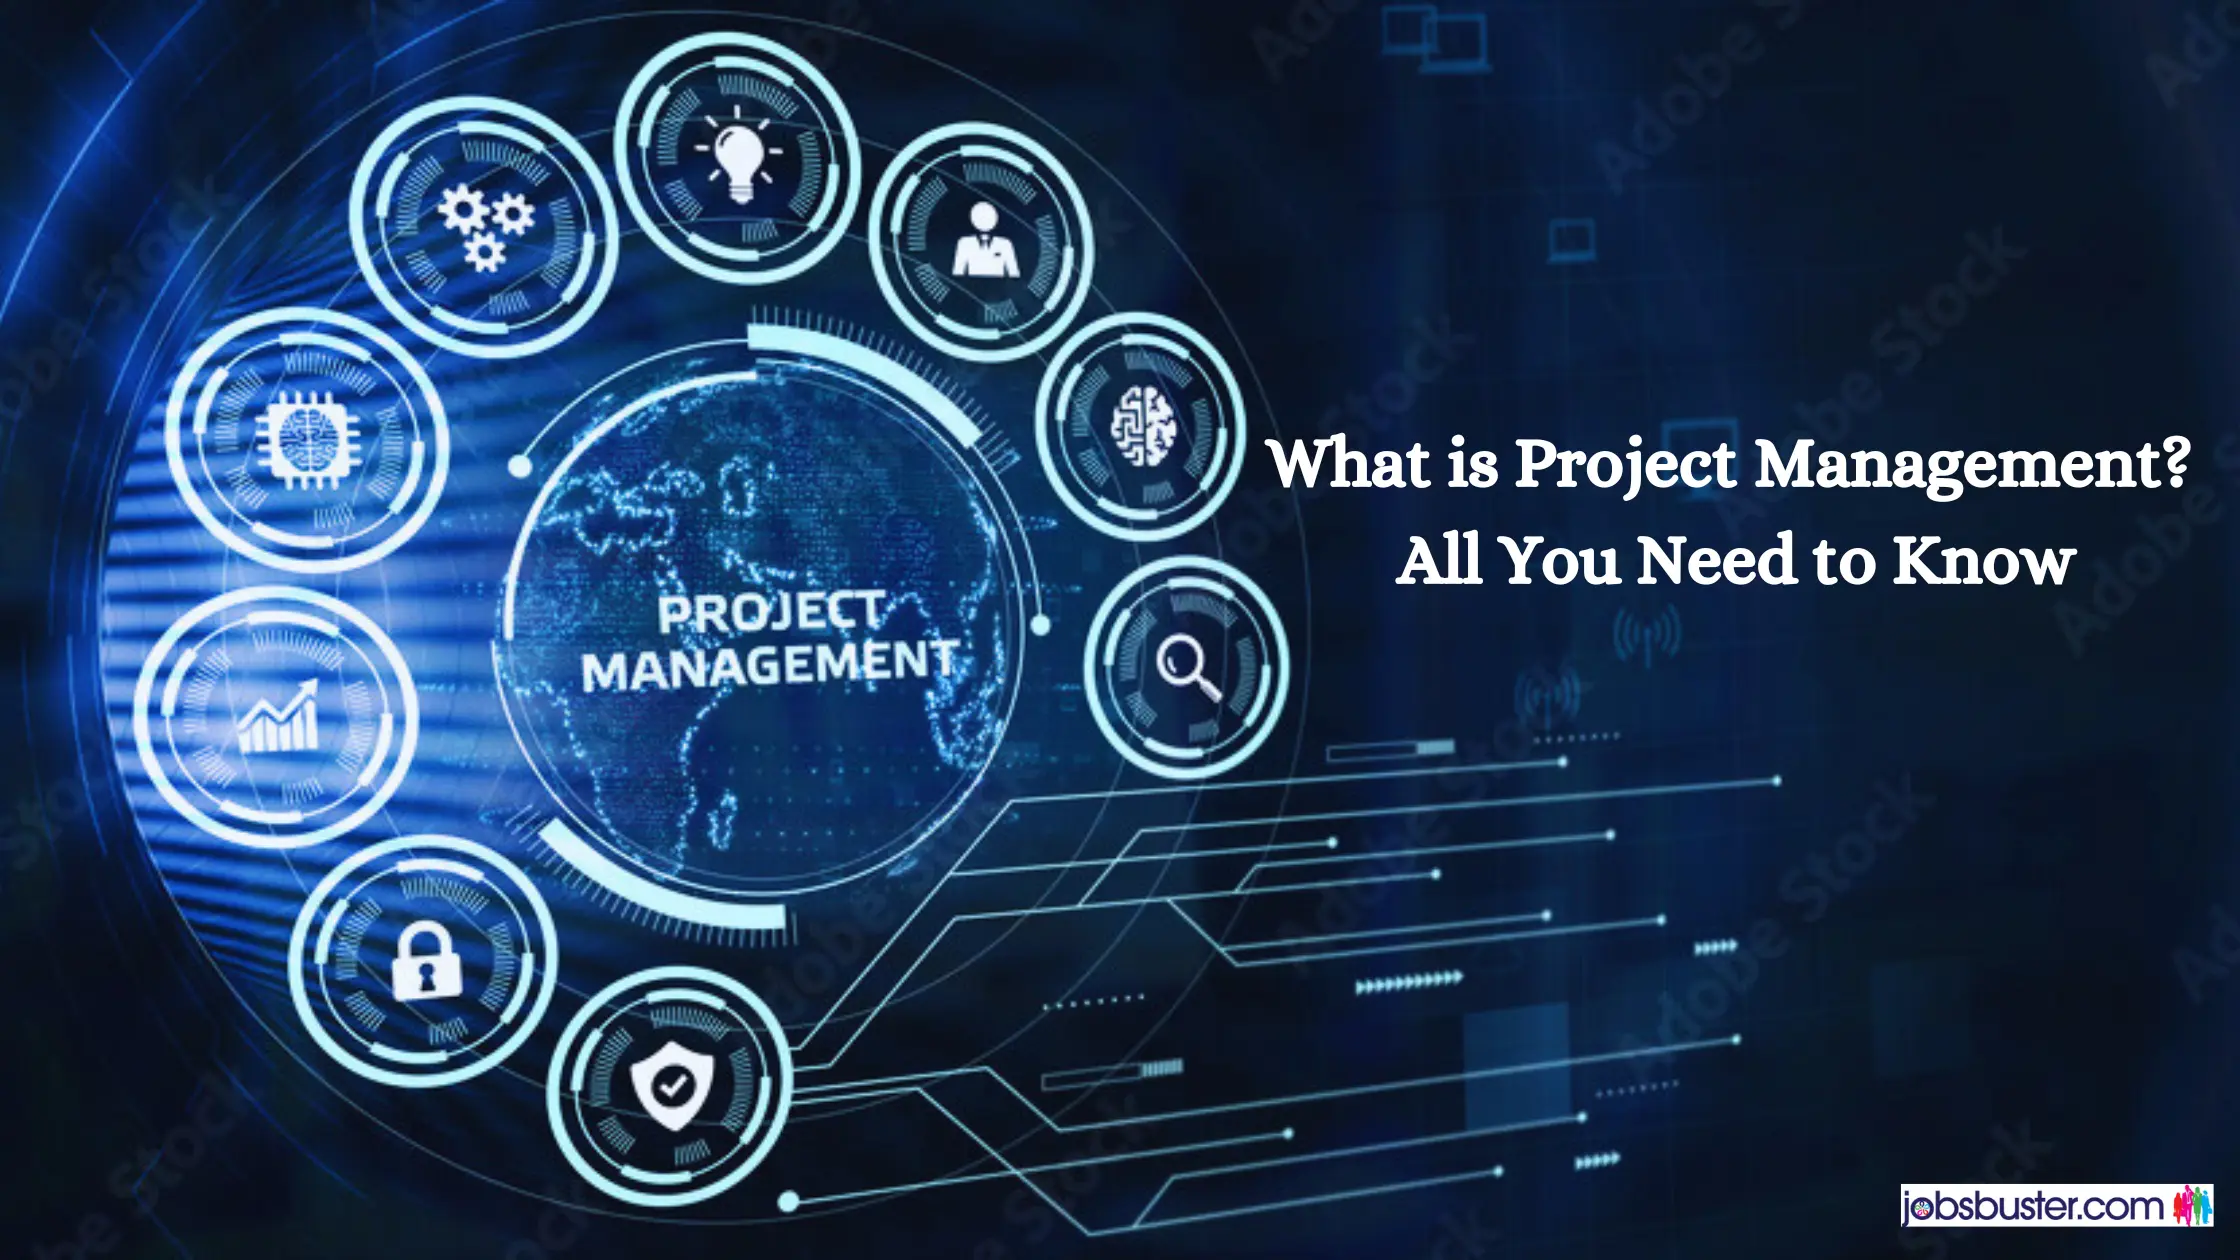 What is Project Management? All You Need to Know